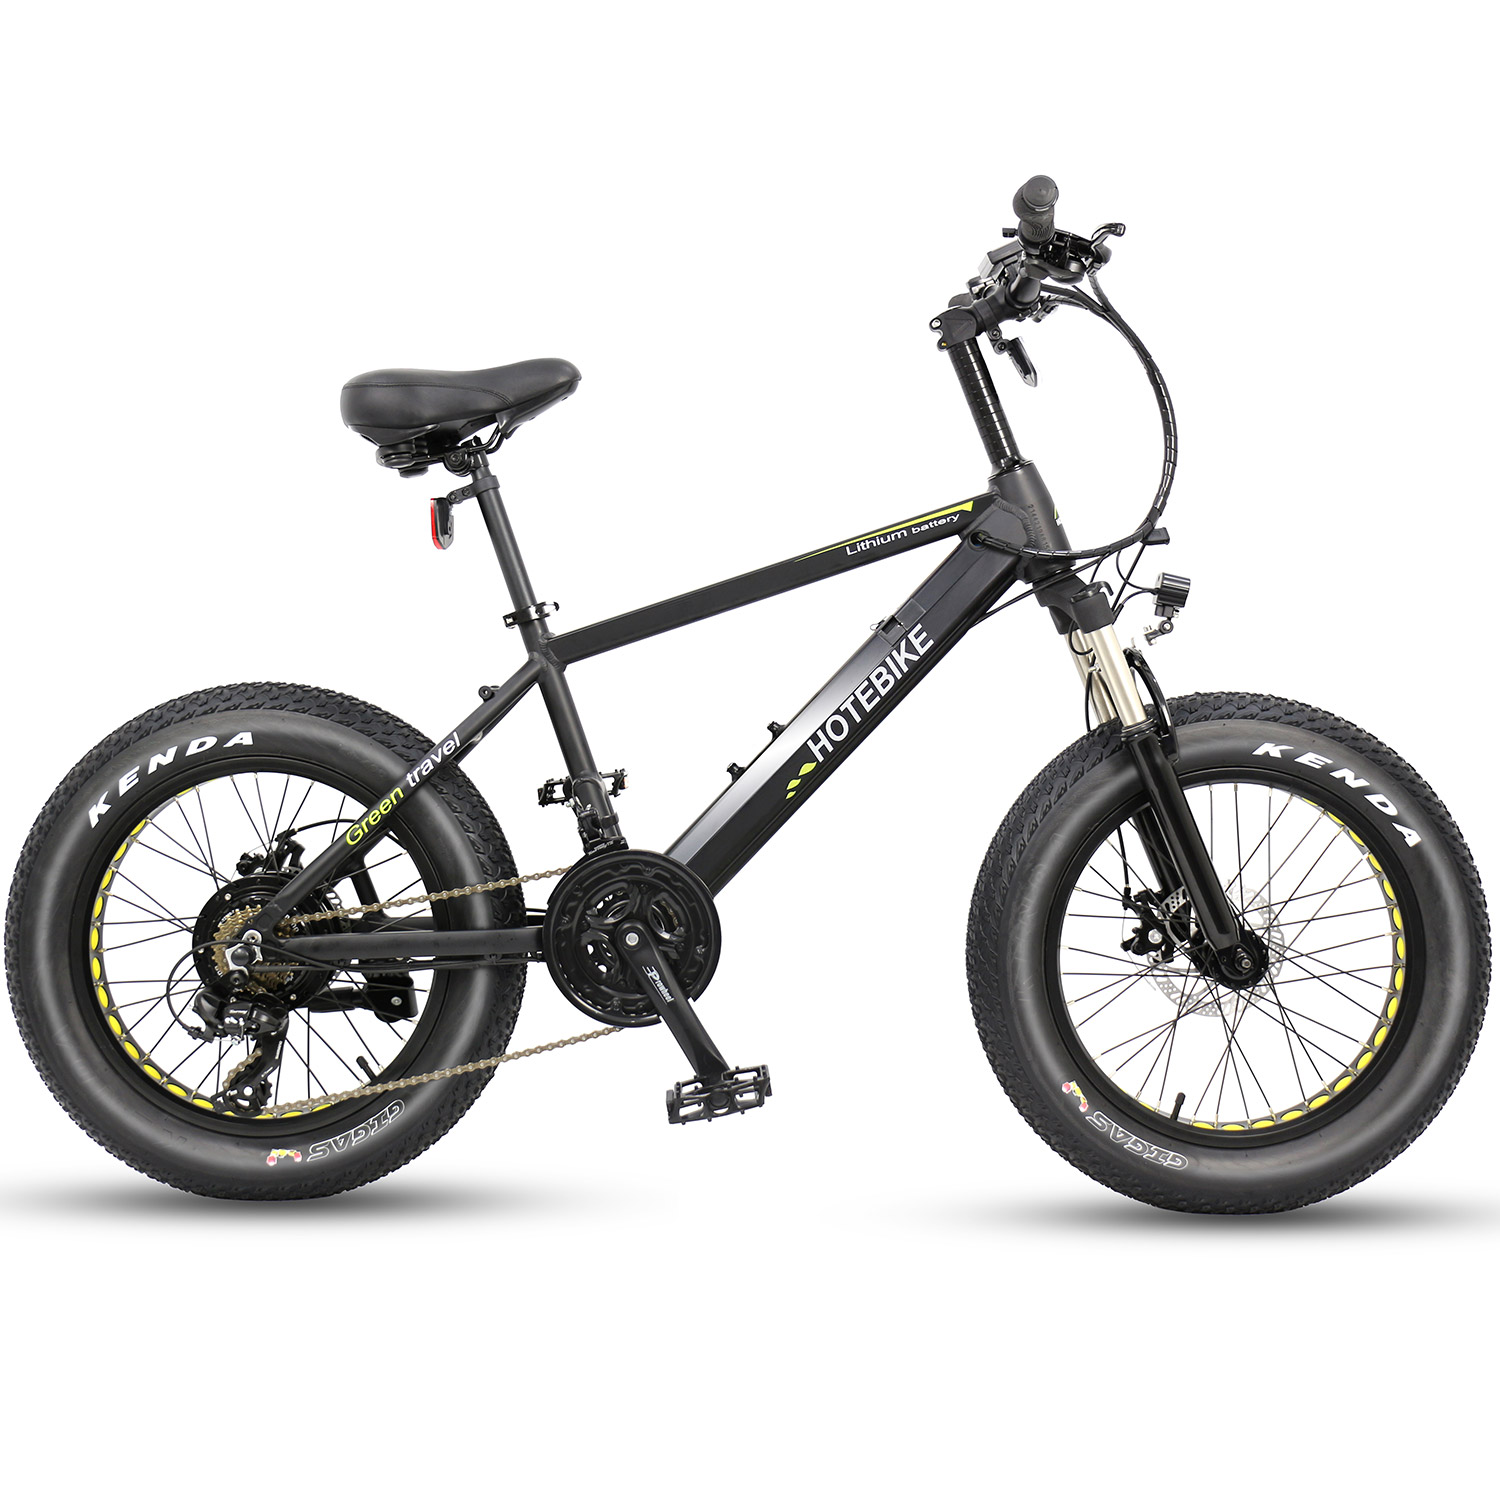 Father's day----Electric mountain bike for the men who deserves it all - News - 6